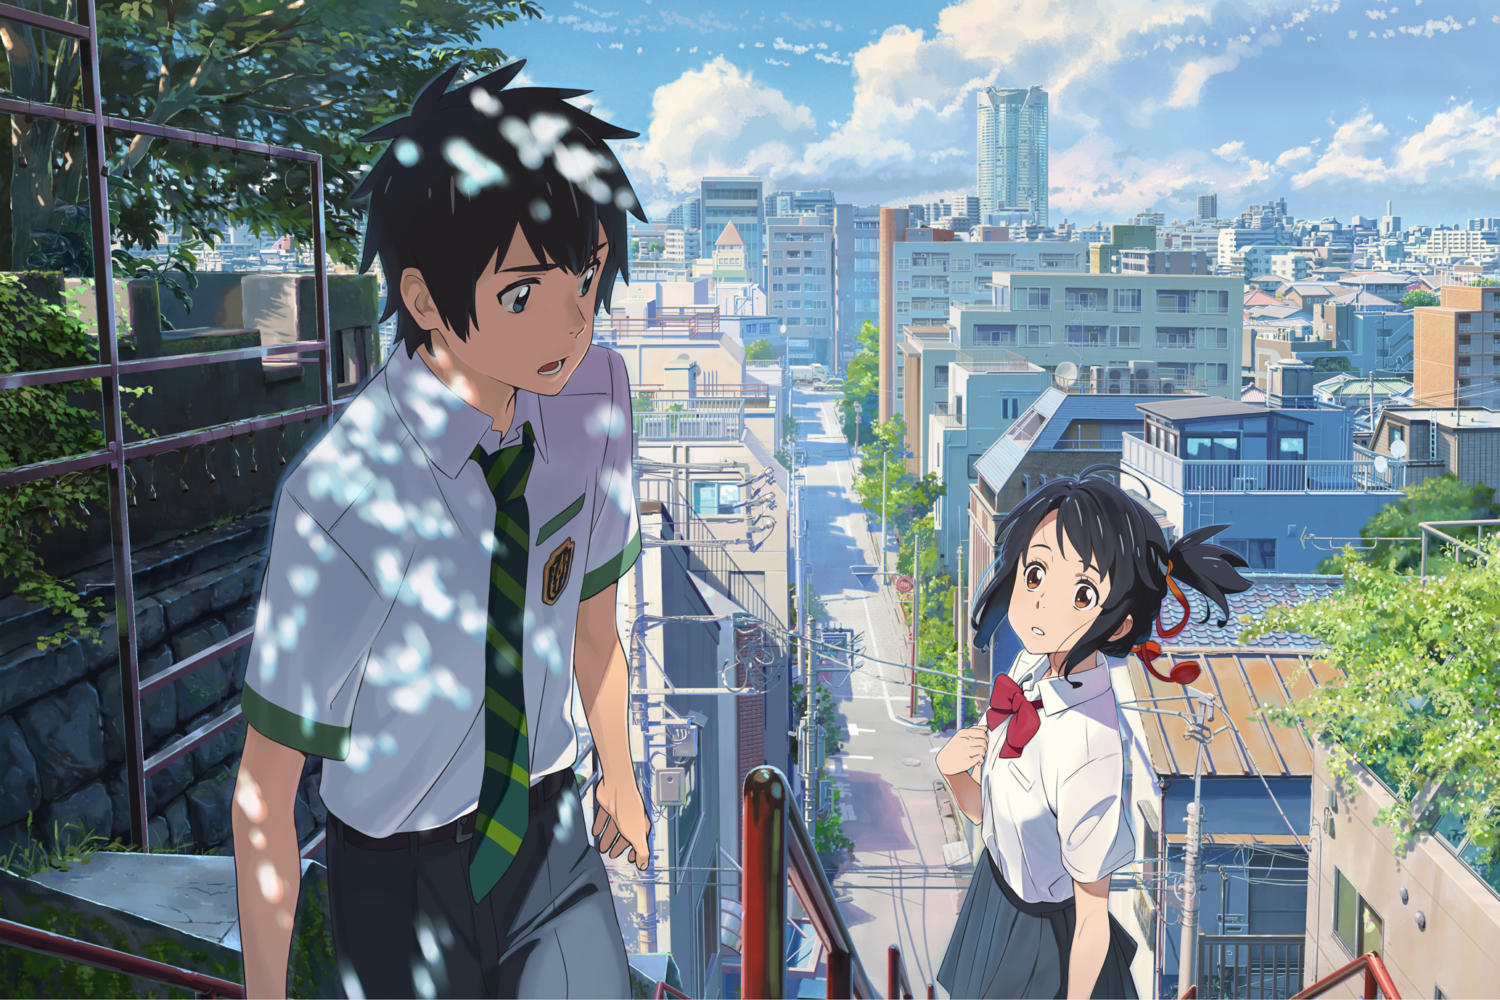 Your Name impresses audiences